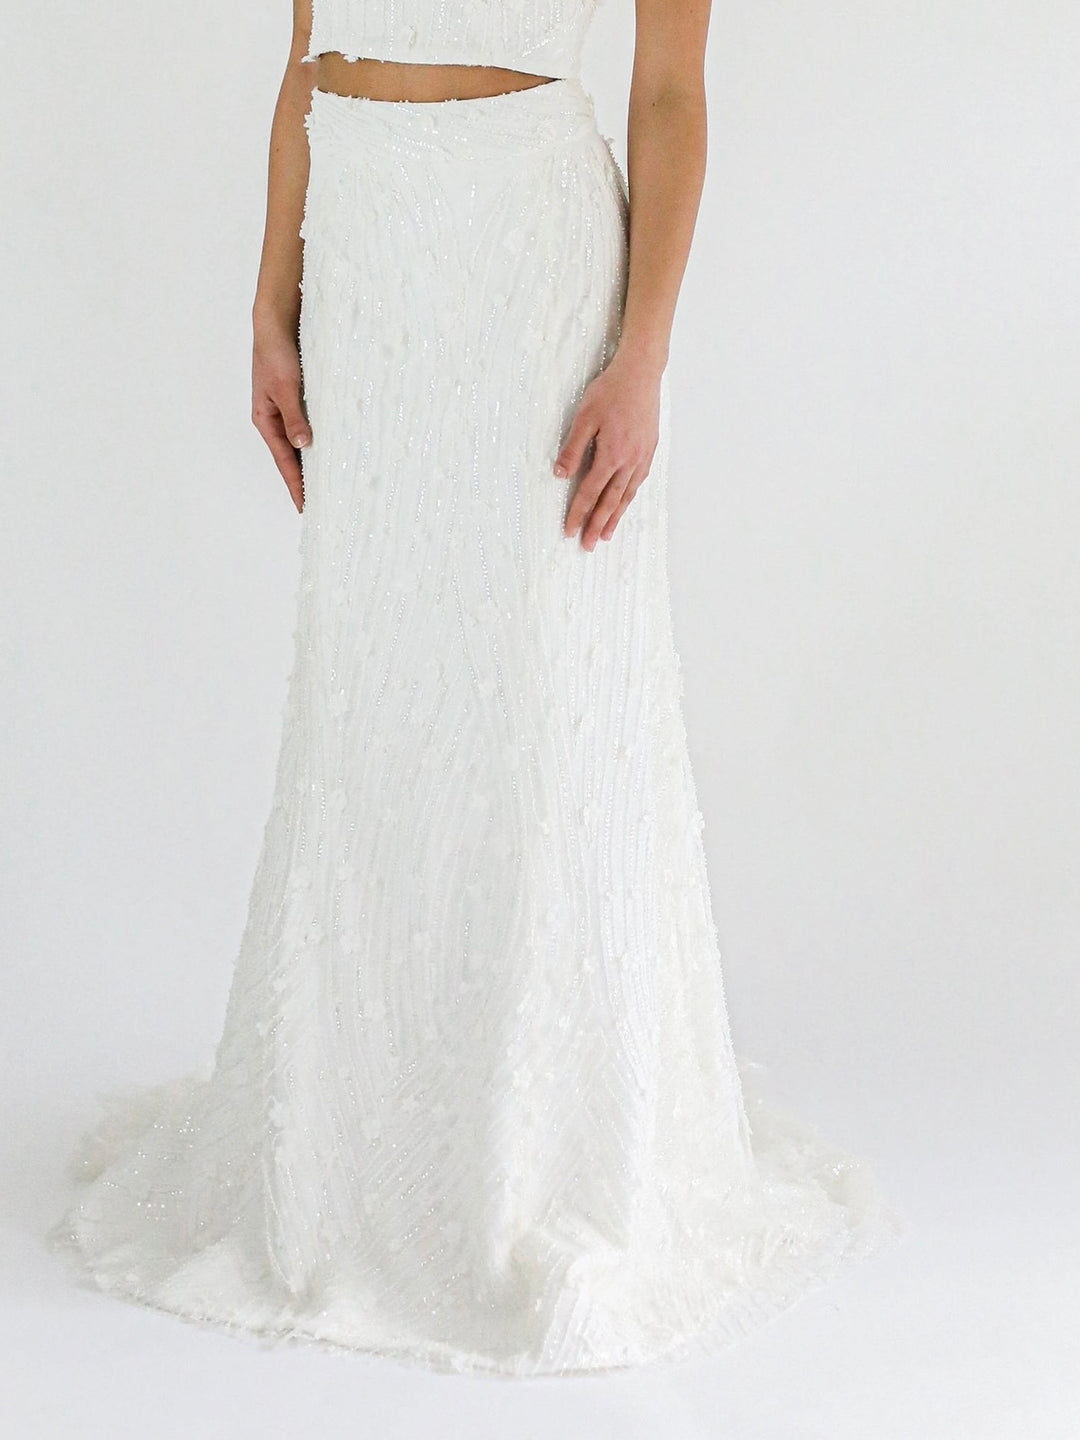 Elevate your bridal style with the Hello Bride Couture Embellished Long Skirt